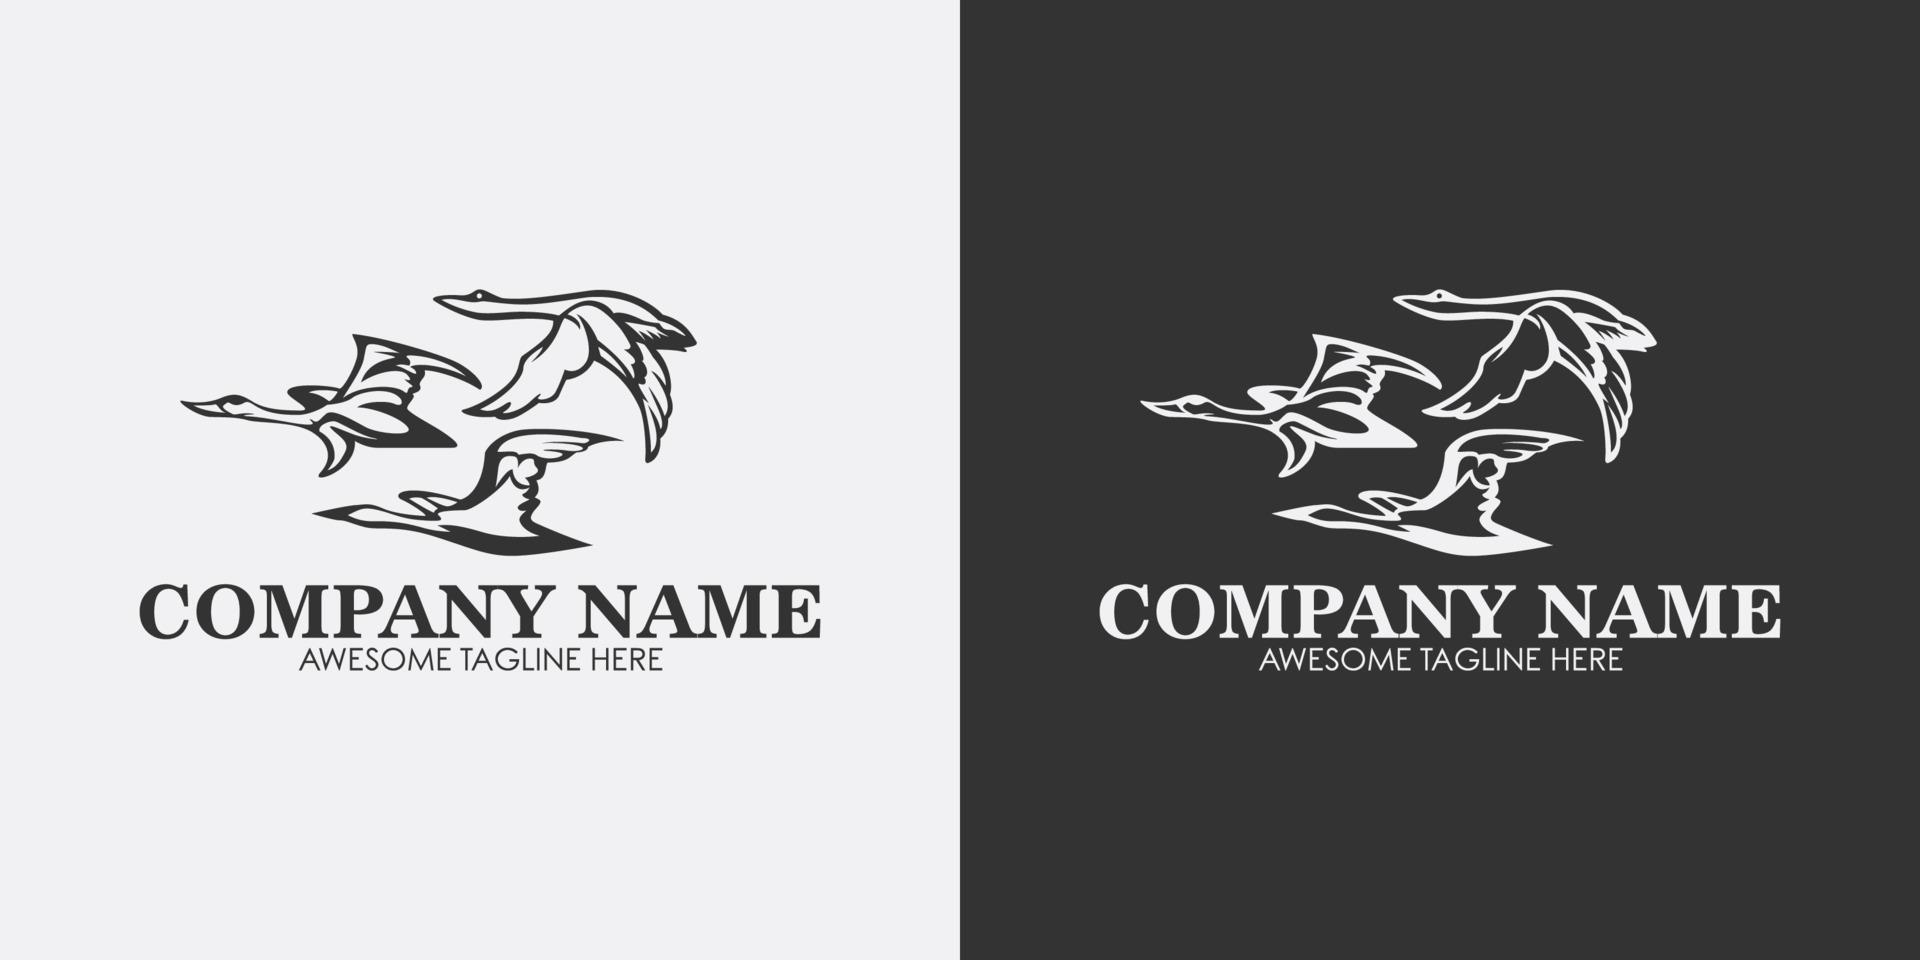 Three flying swans logo design concept template with three color variants of black, white and green vector